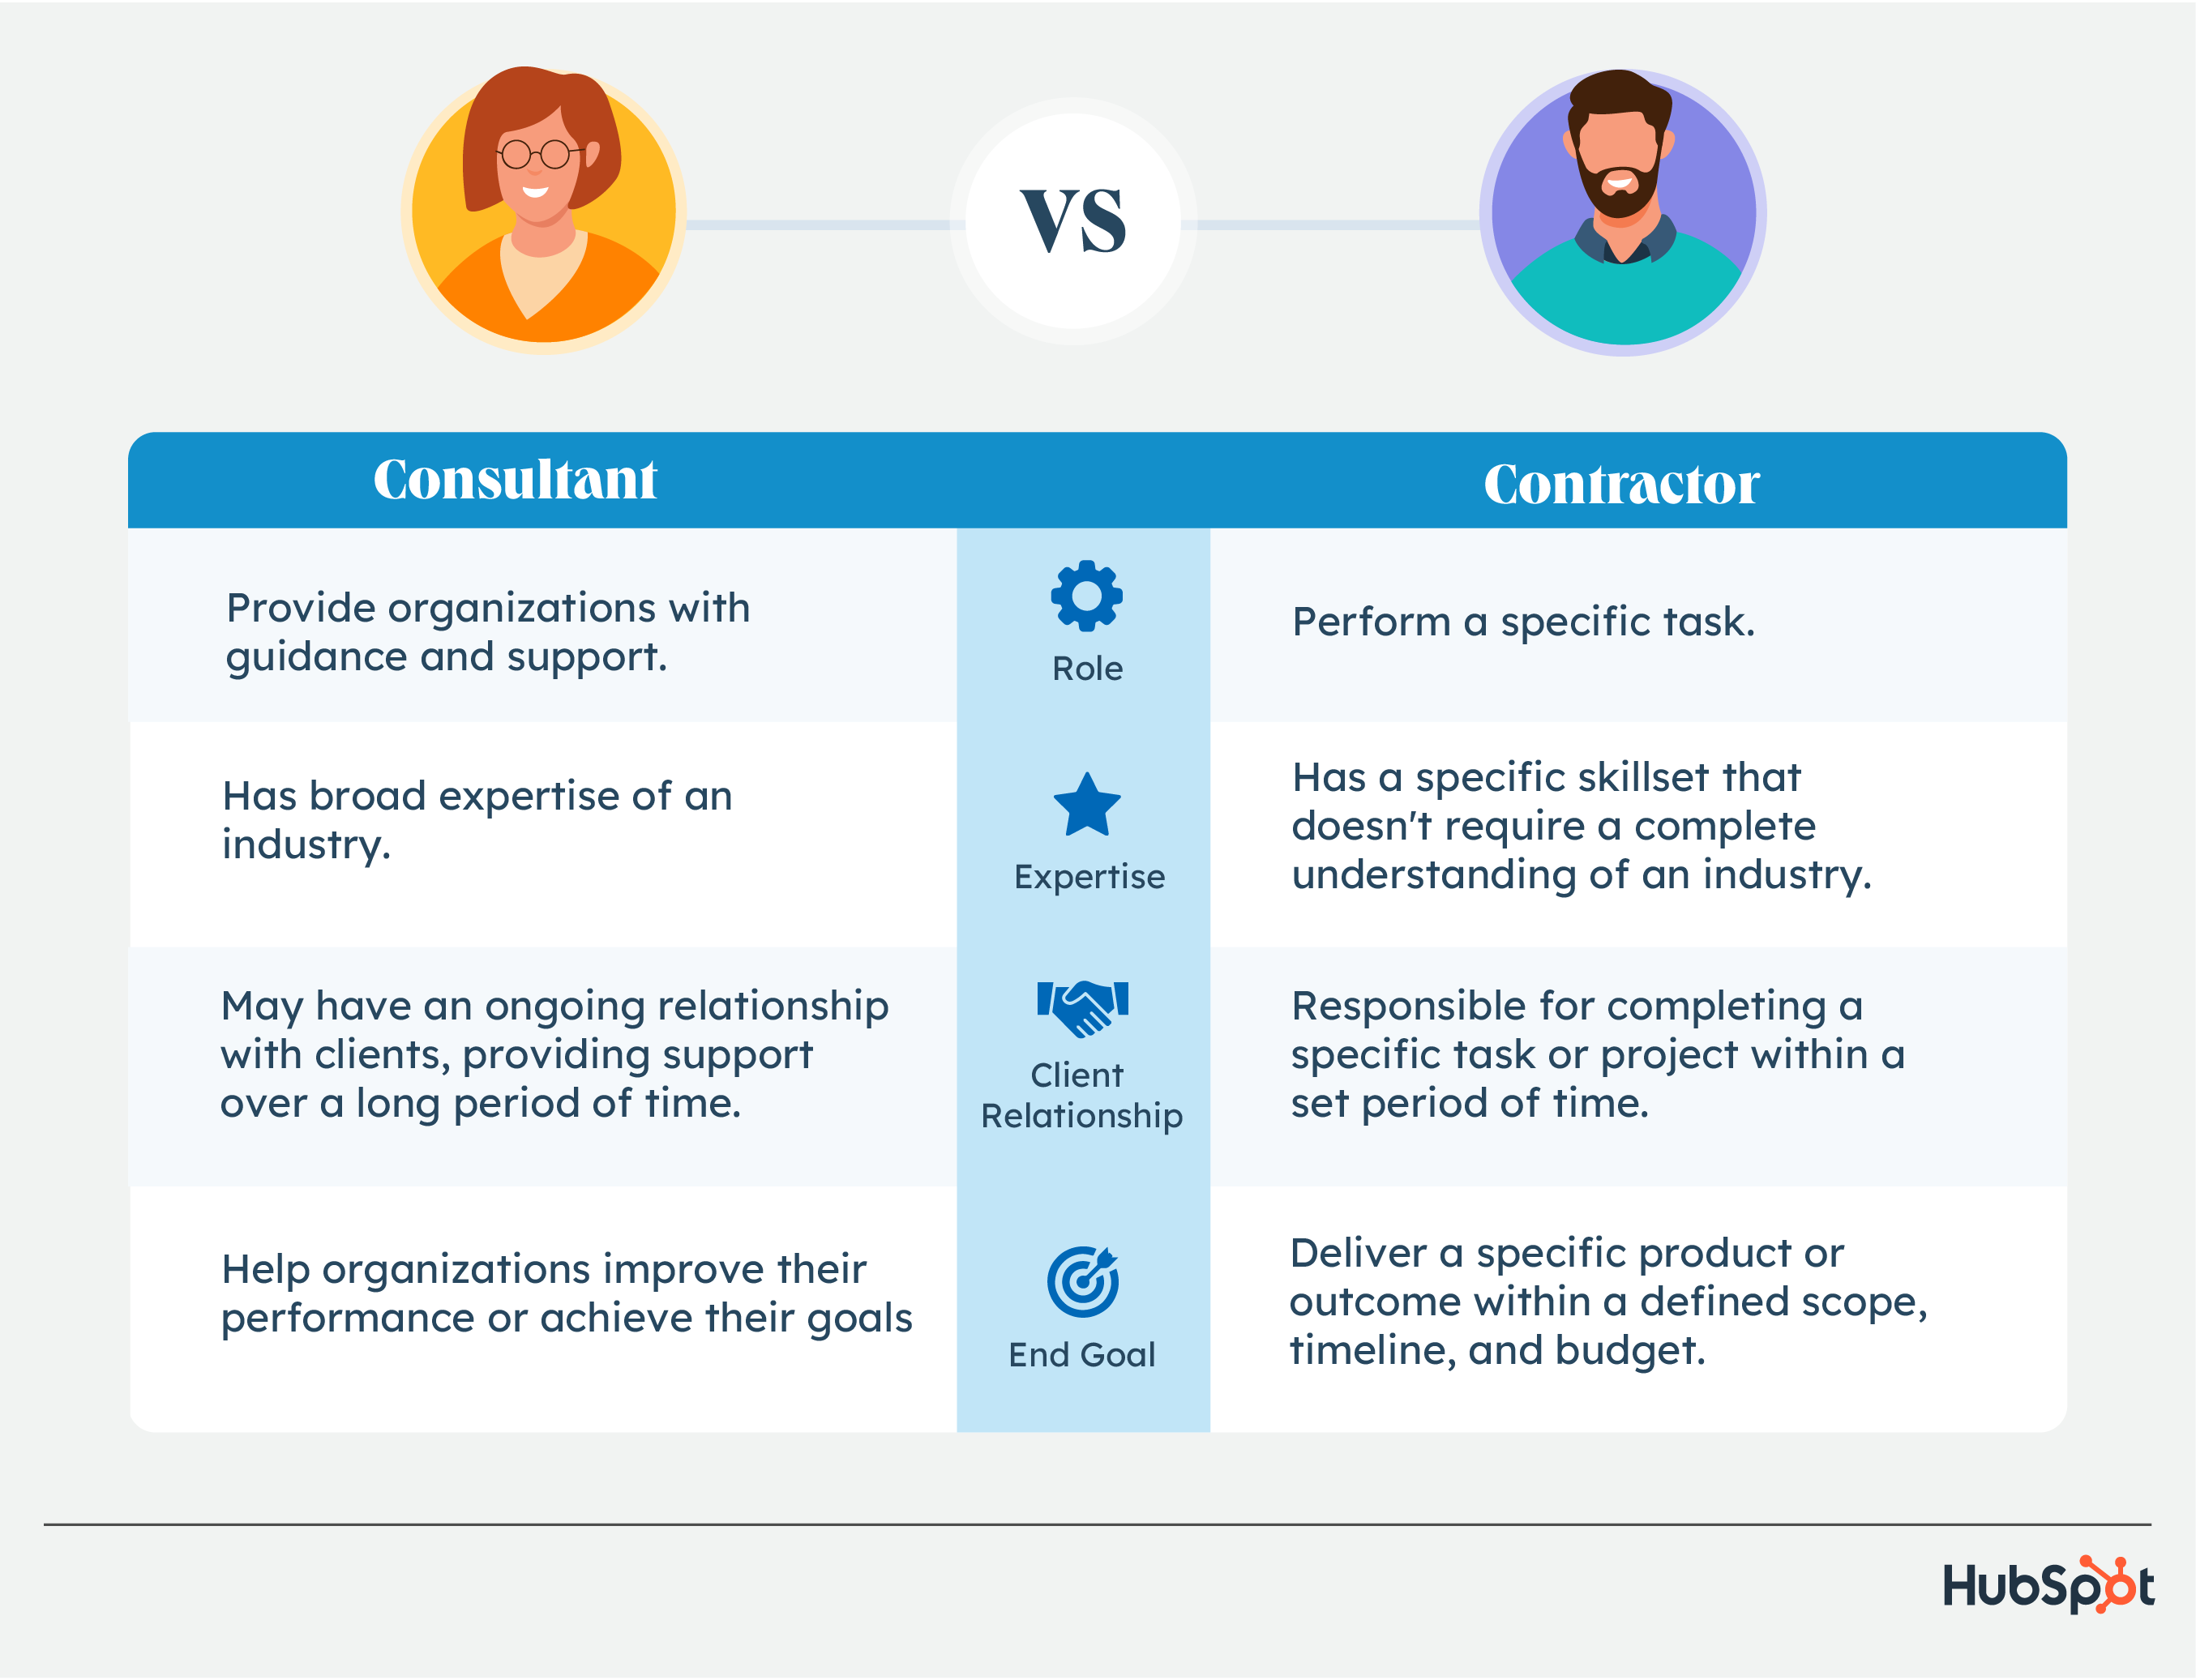 Consultant vs. Contractor: difference in roles